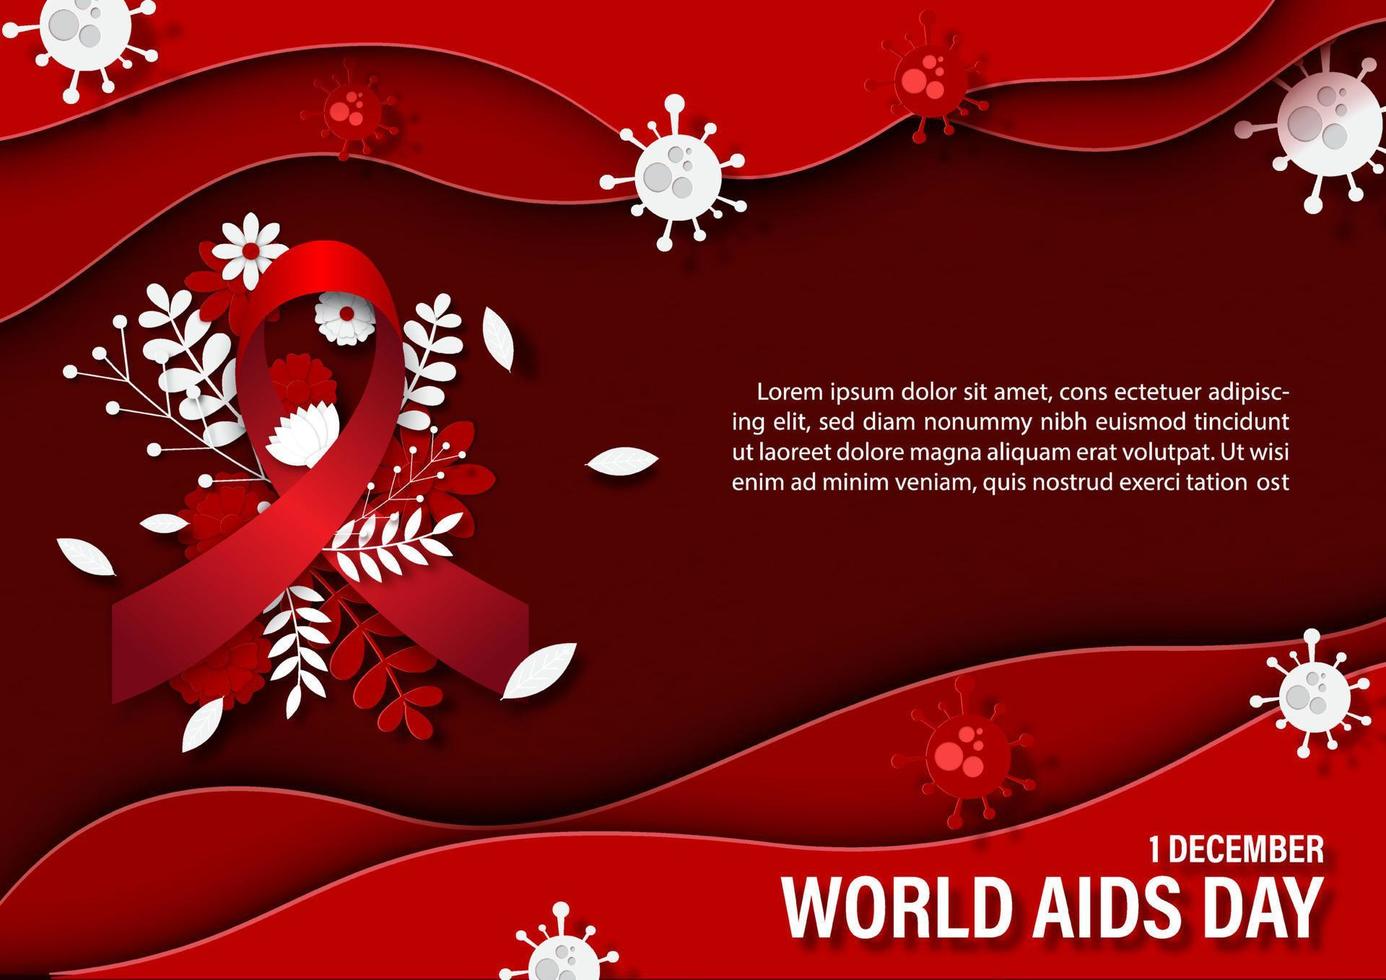 Red ribbon with decorated plants and wording of world AIDS day on wave flame and red background. World AIDS day poster's campaign in paper cut style and vector design.